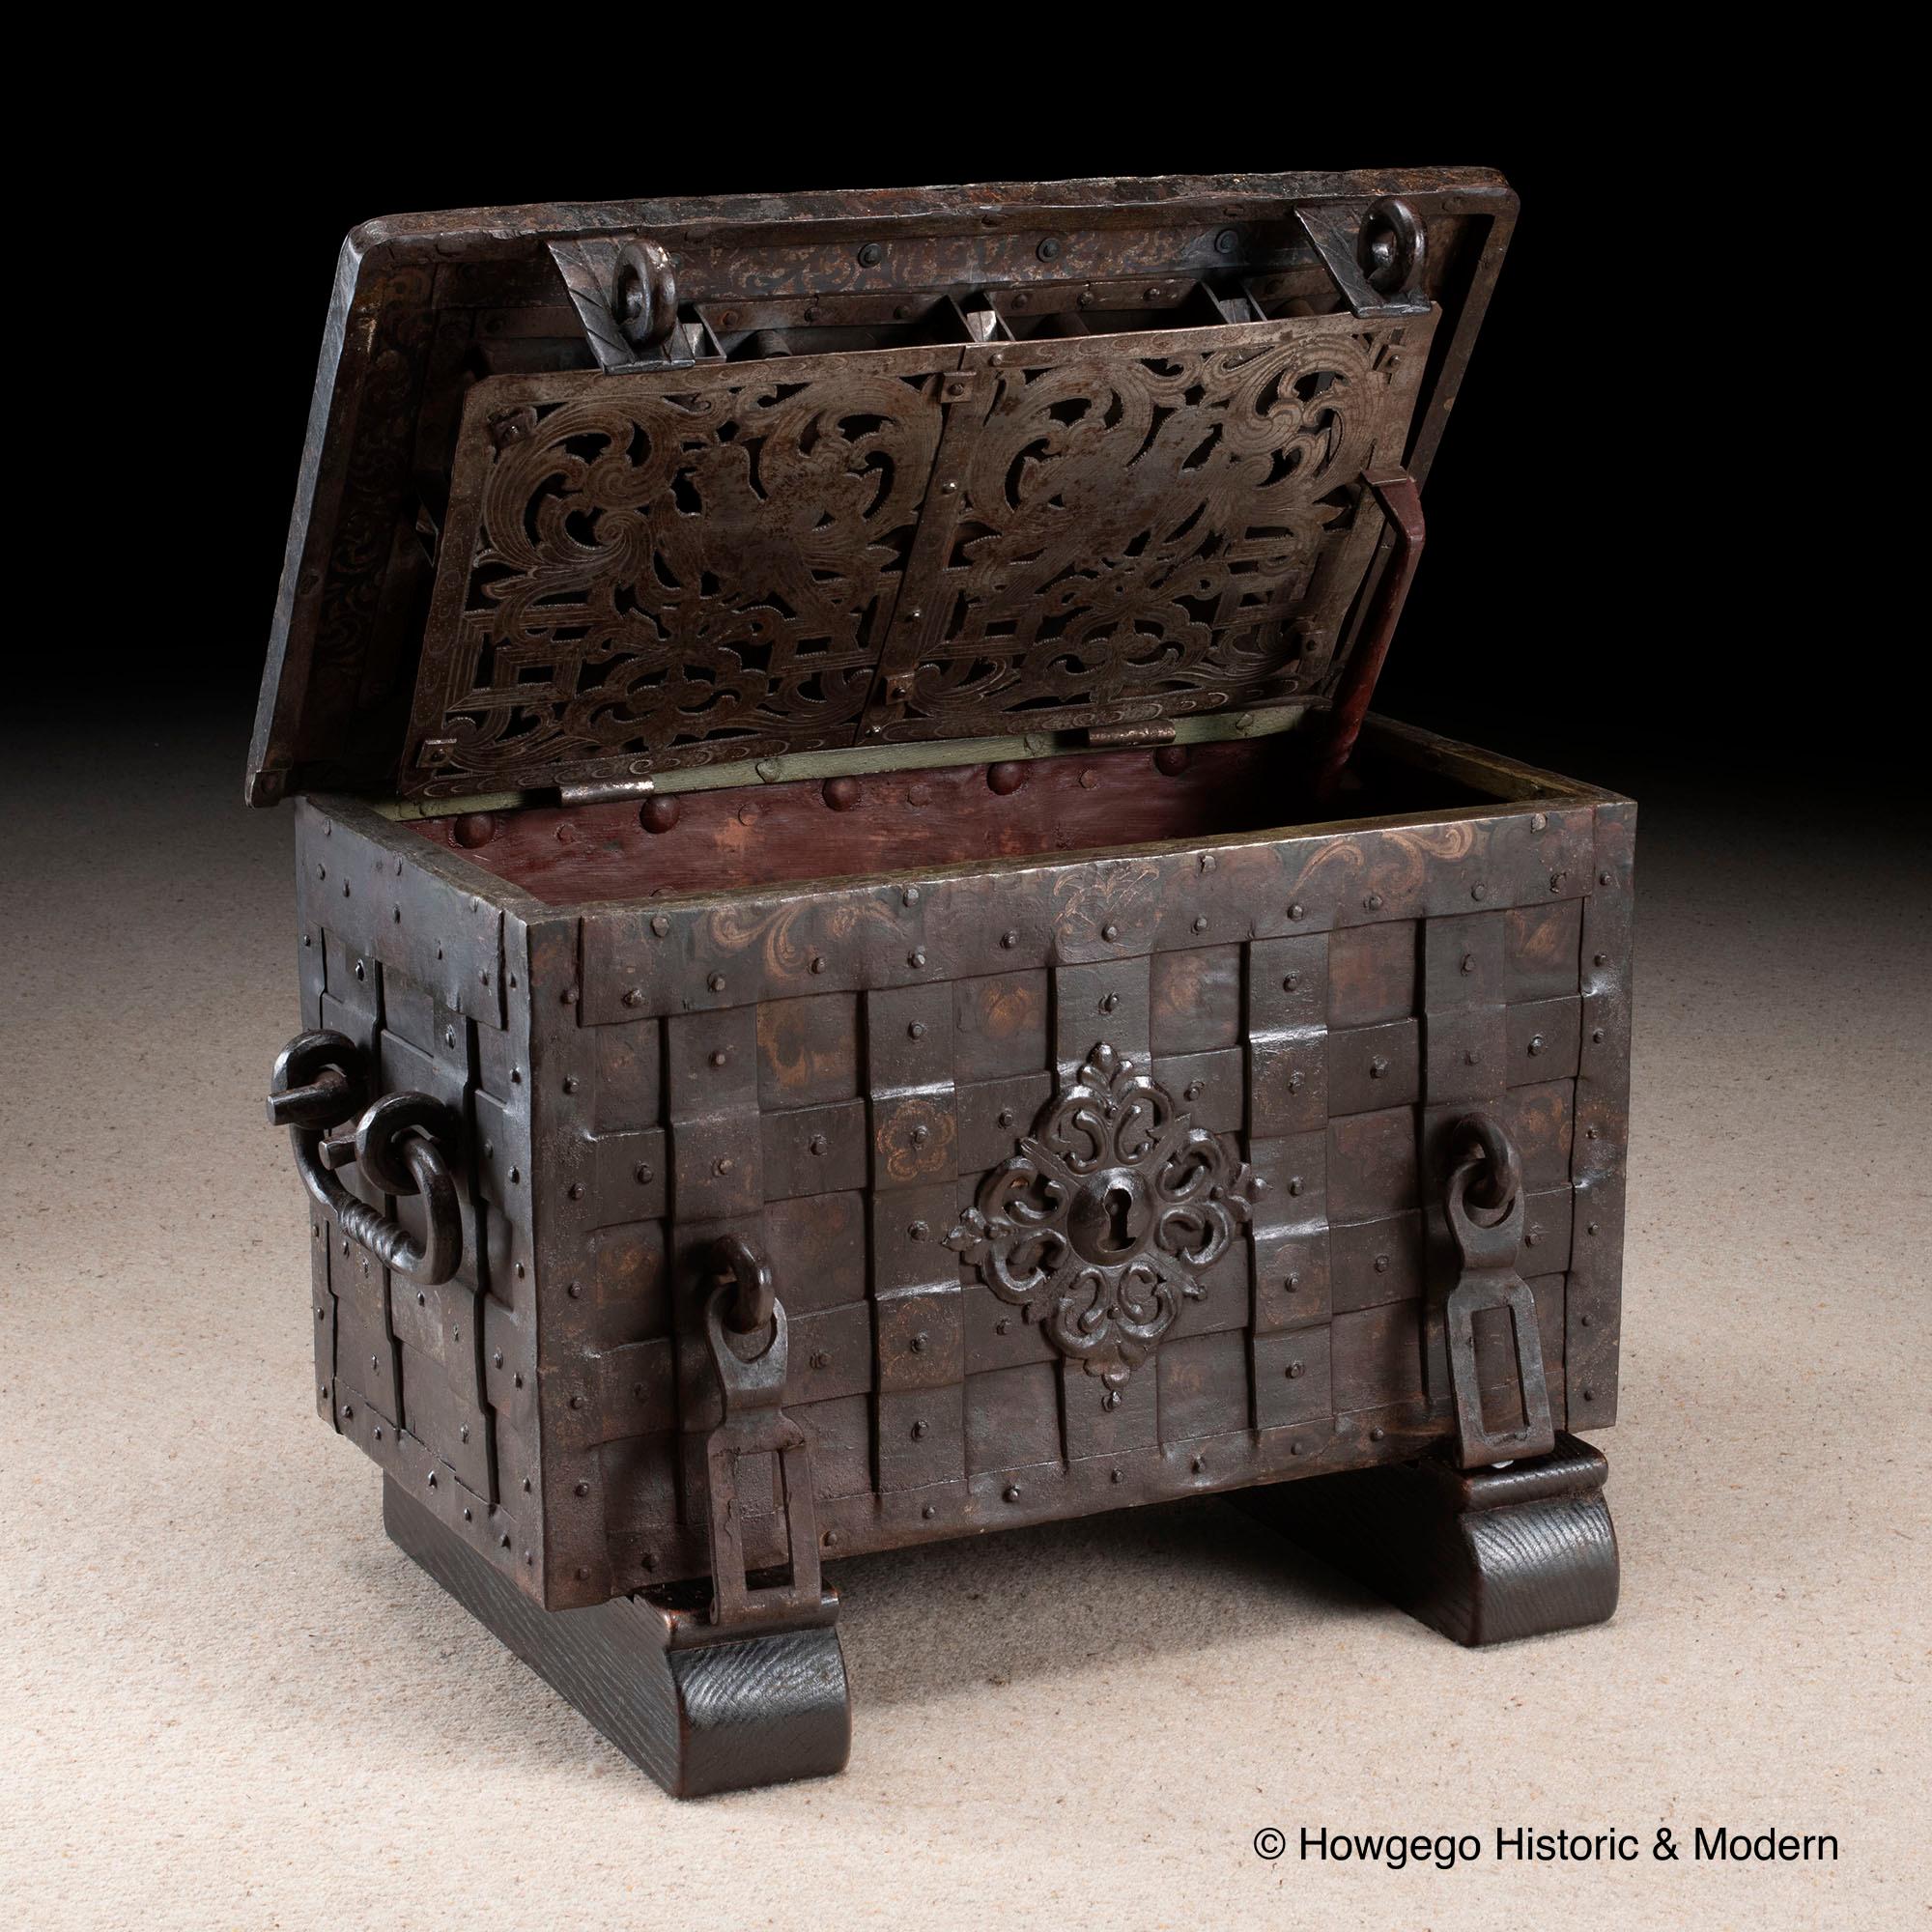 Rare, small, late-Renaissance, Nuremberg, iron, 'armada box', strongbox or travelling safe with its original, naïve, painted decoration on later sledge feet

This is a rare, small, example of these characterful, early models of transportable safes.